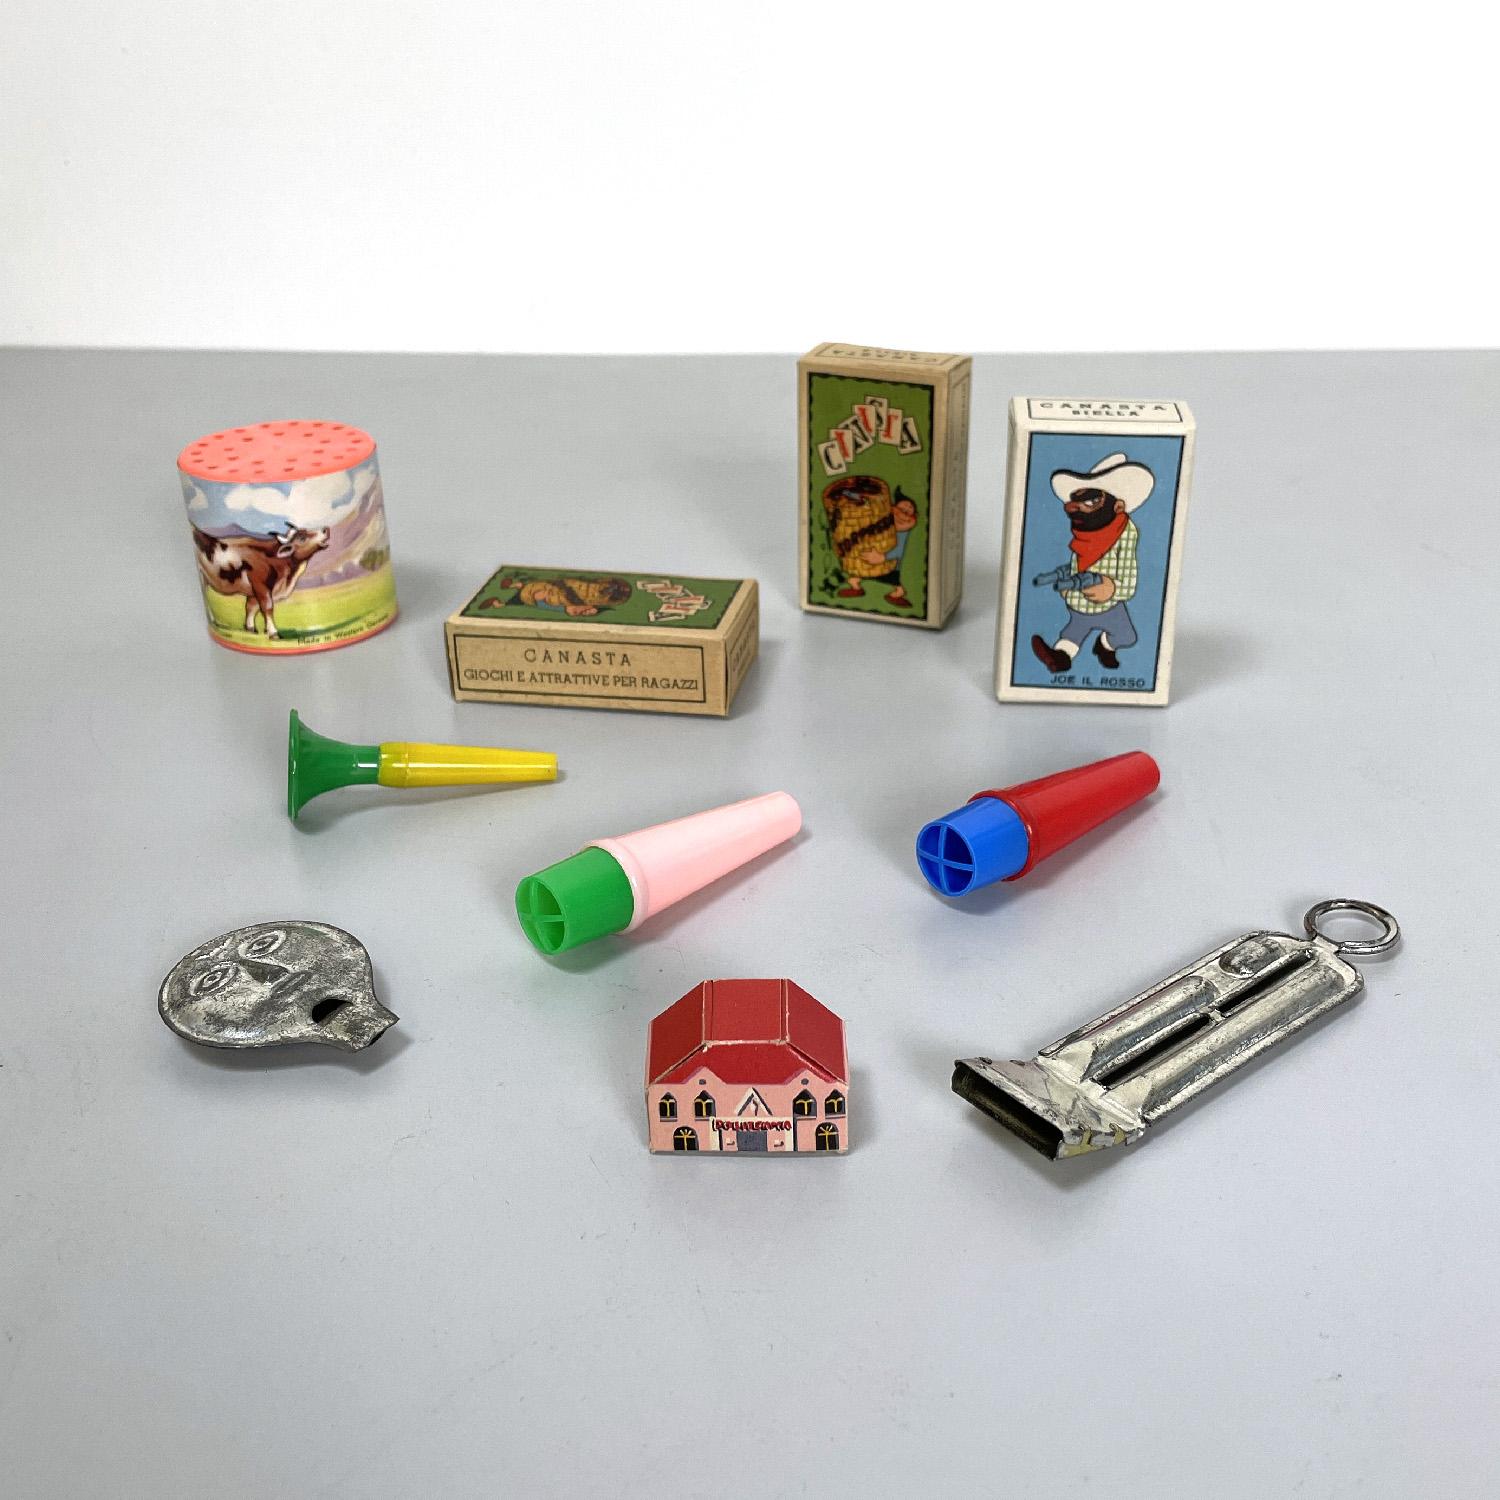 Italian mid-century modern whistles and musical games, 1960s
Music game set. There are three whistles in yellow, green, red and blue colored plastic; three small cardboard boxes with colored prints of some characters, two metal whistles, one of